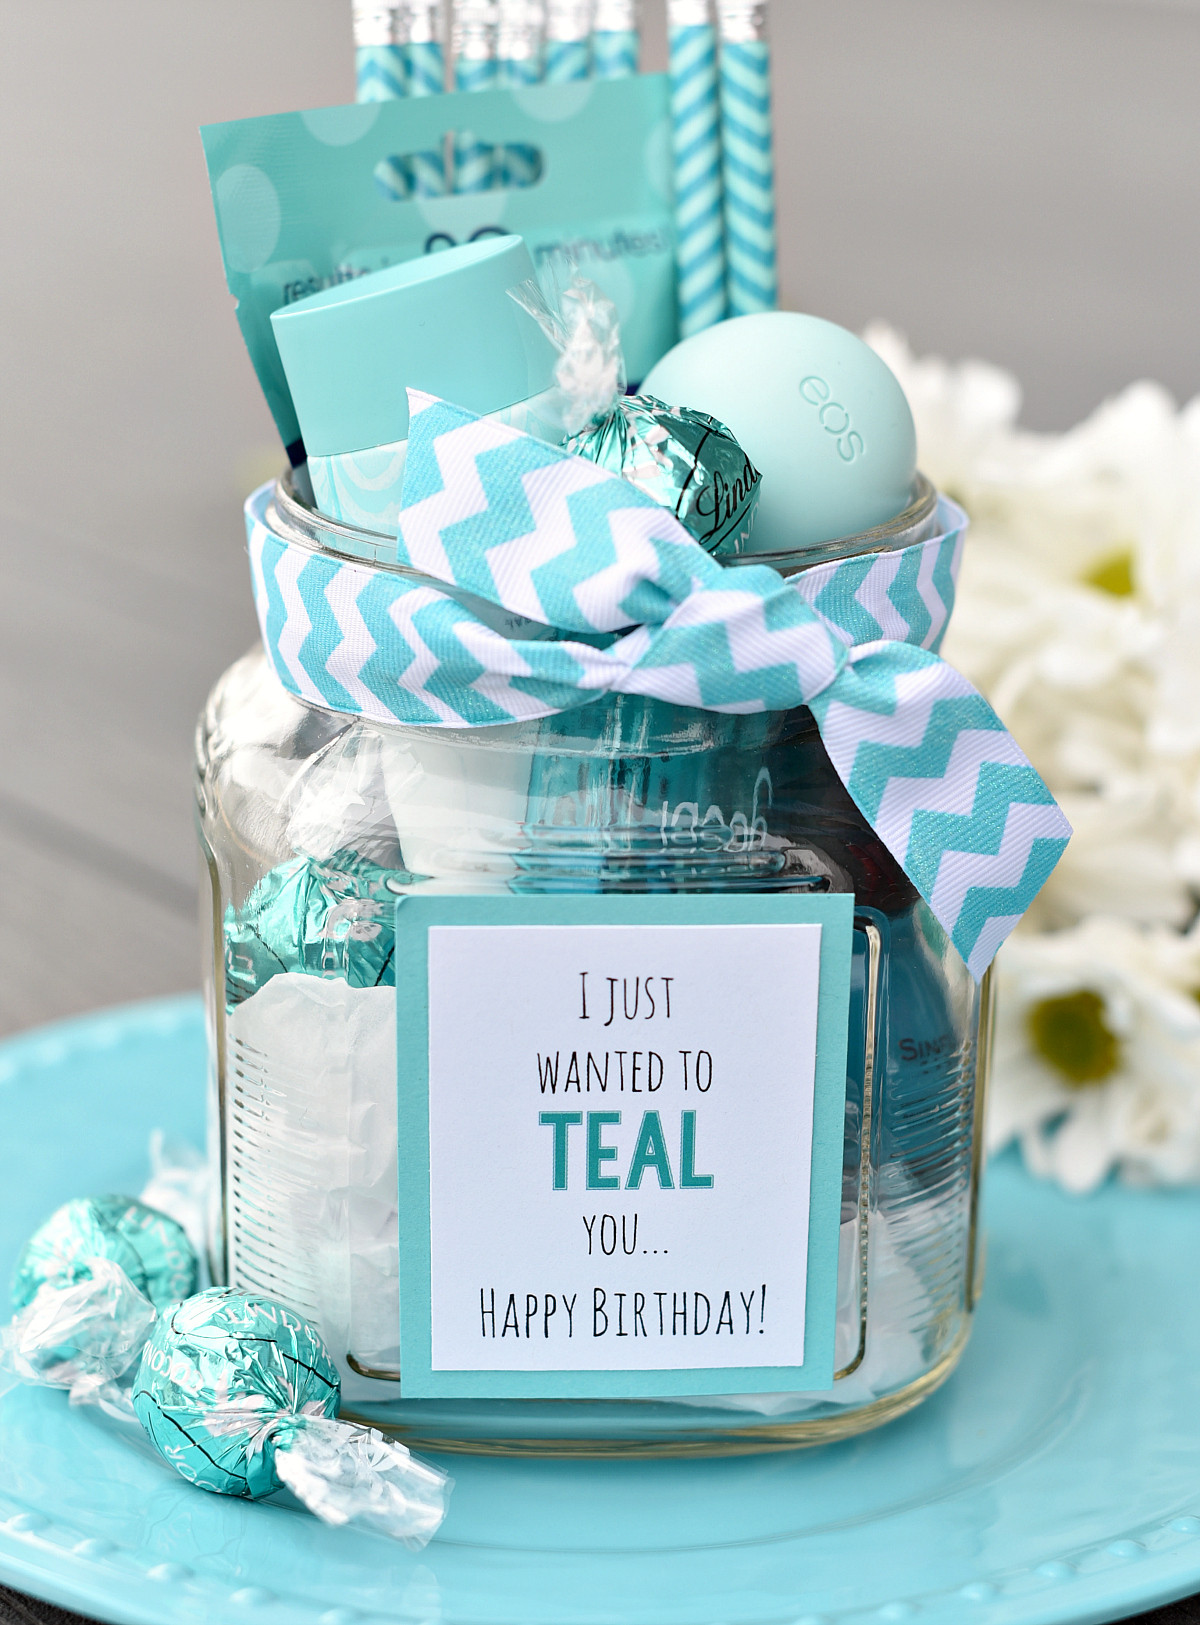 Gifts For Bestfriends Birthday
 Teal Birthday Gift Idea for Friends – Fun Squared